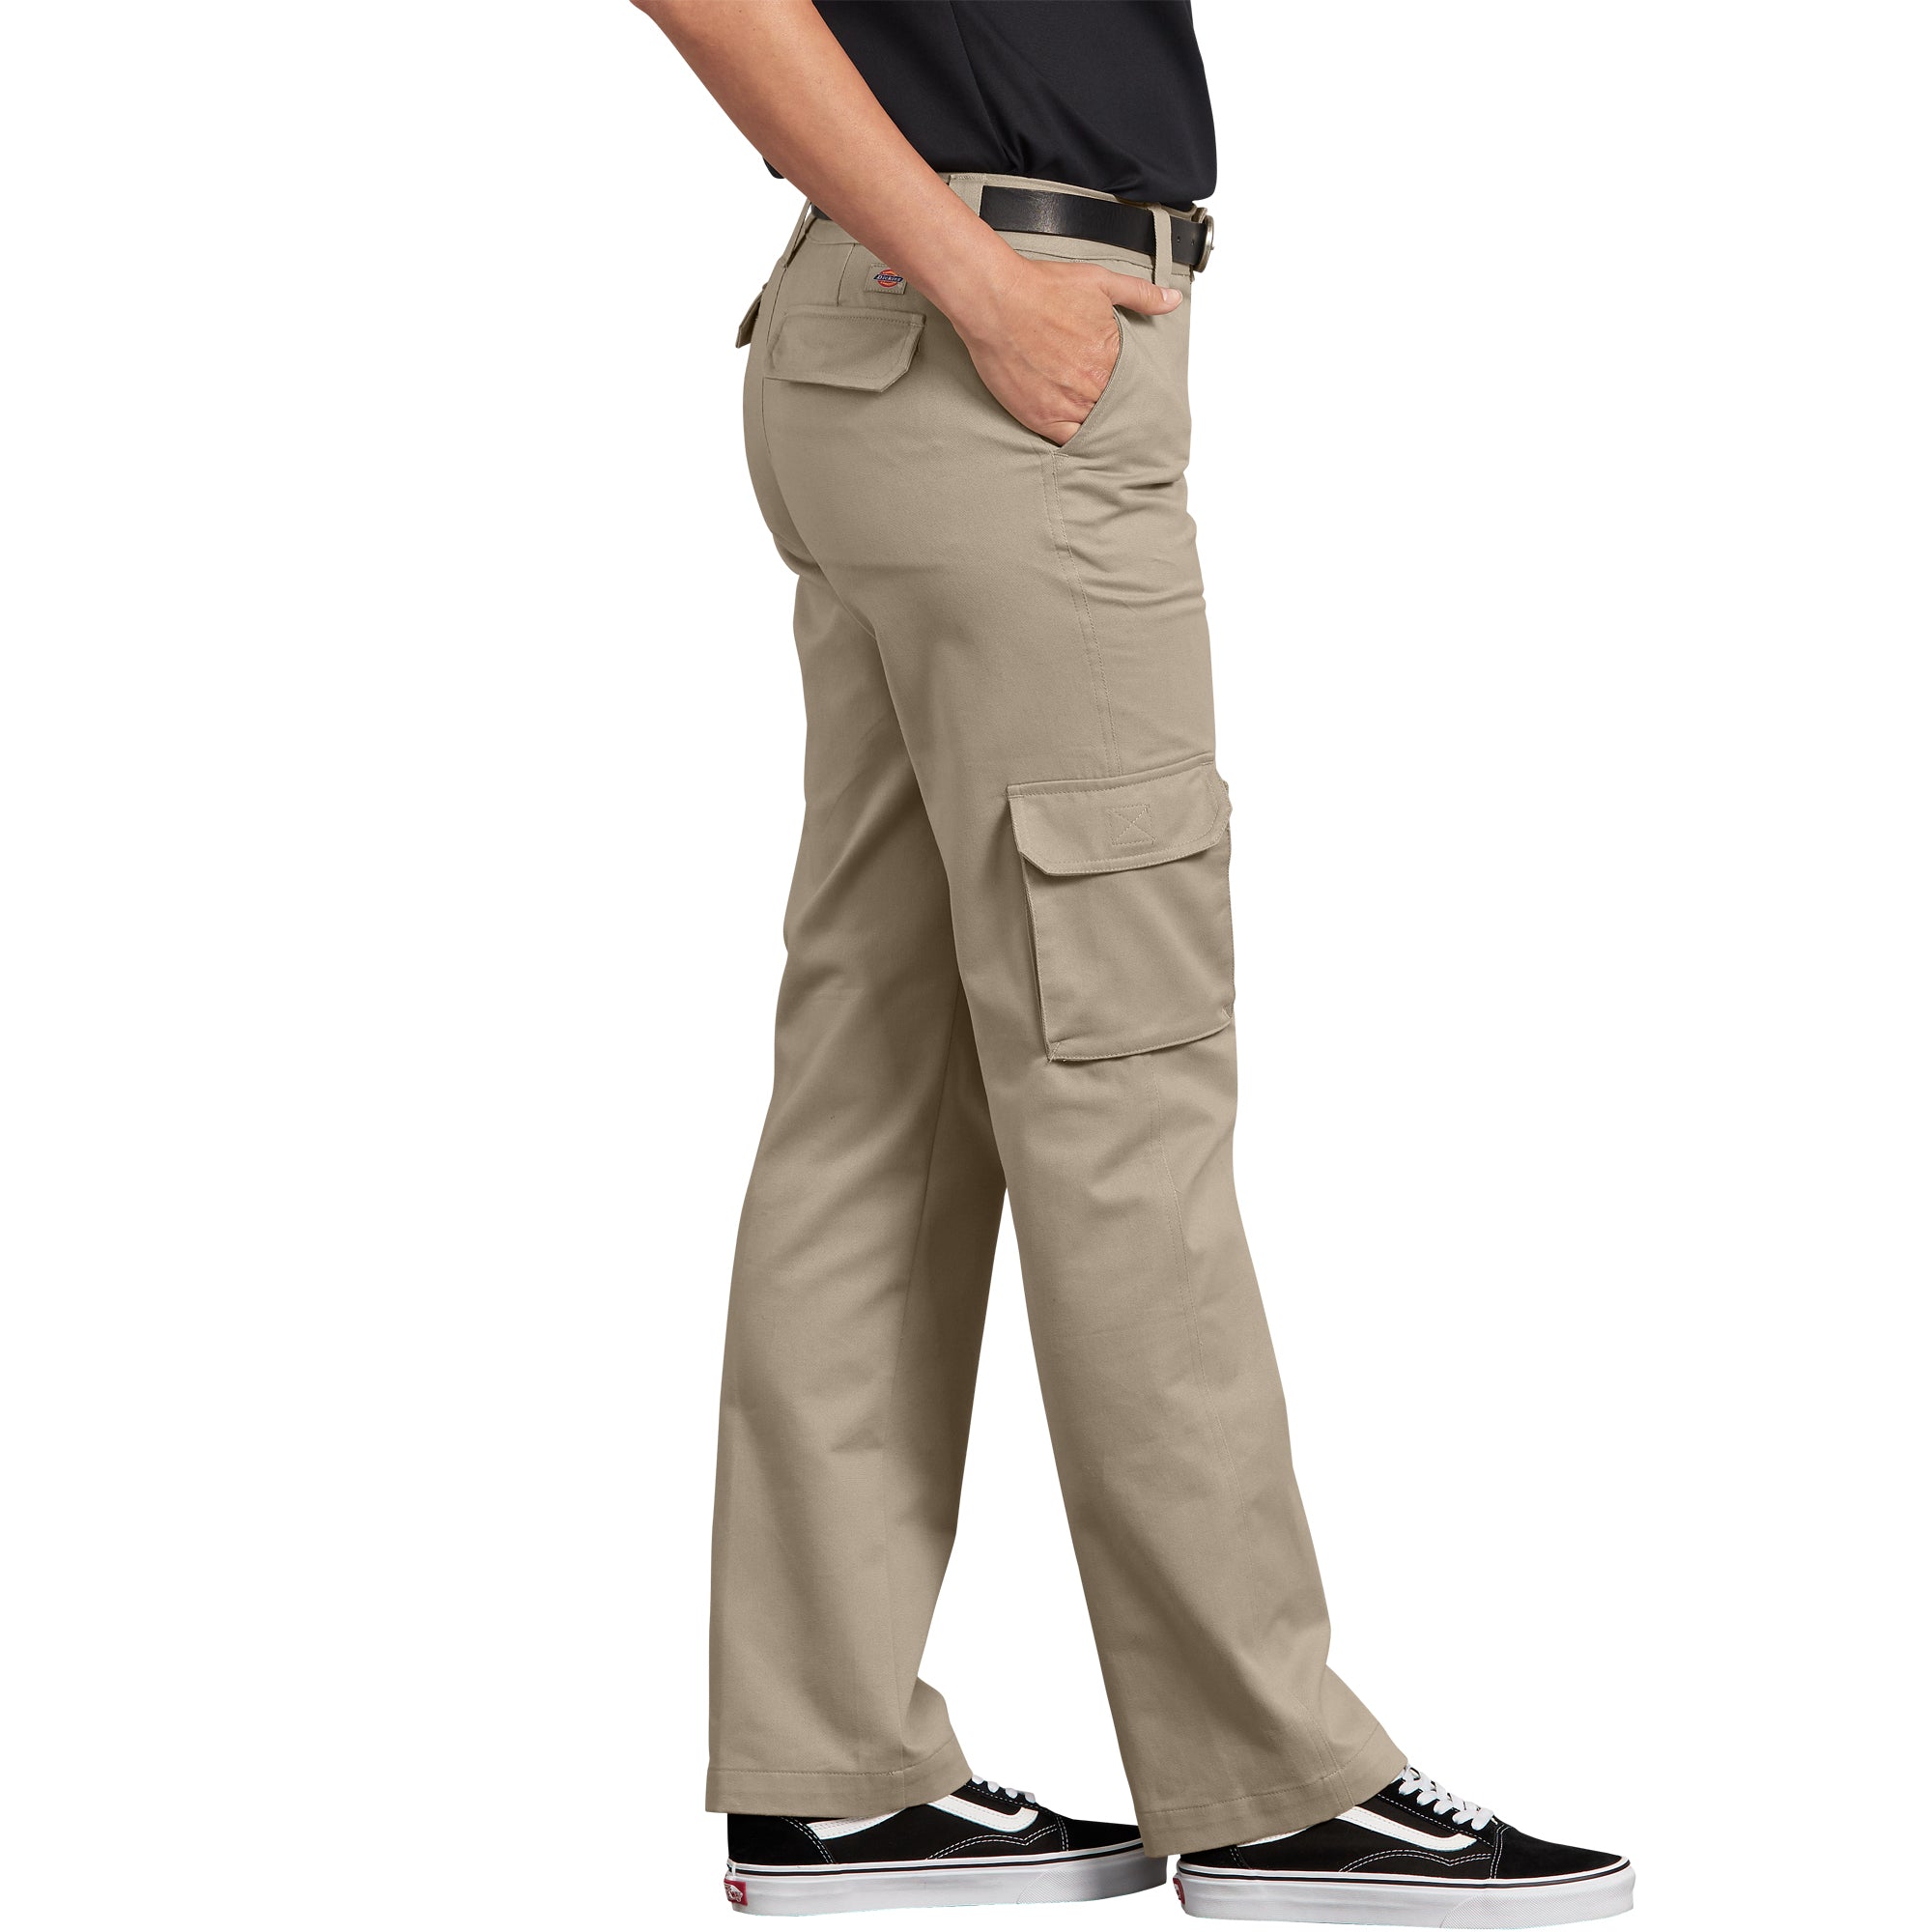 Dickies Stretch Cargo Women's Work Pant FP888DS - Beige | Work Authority